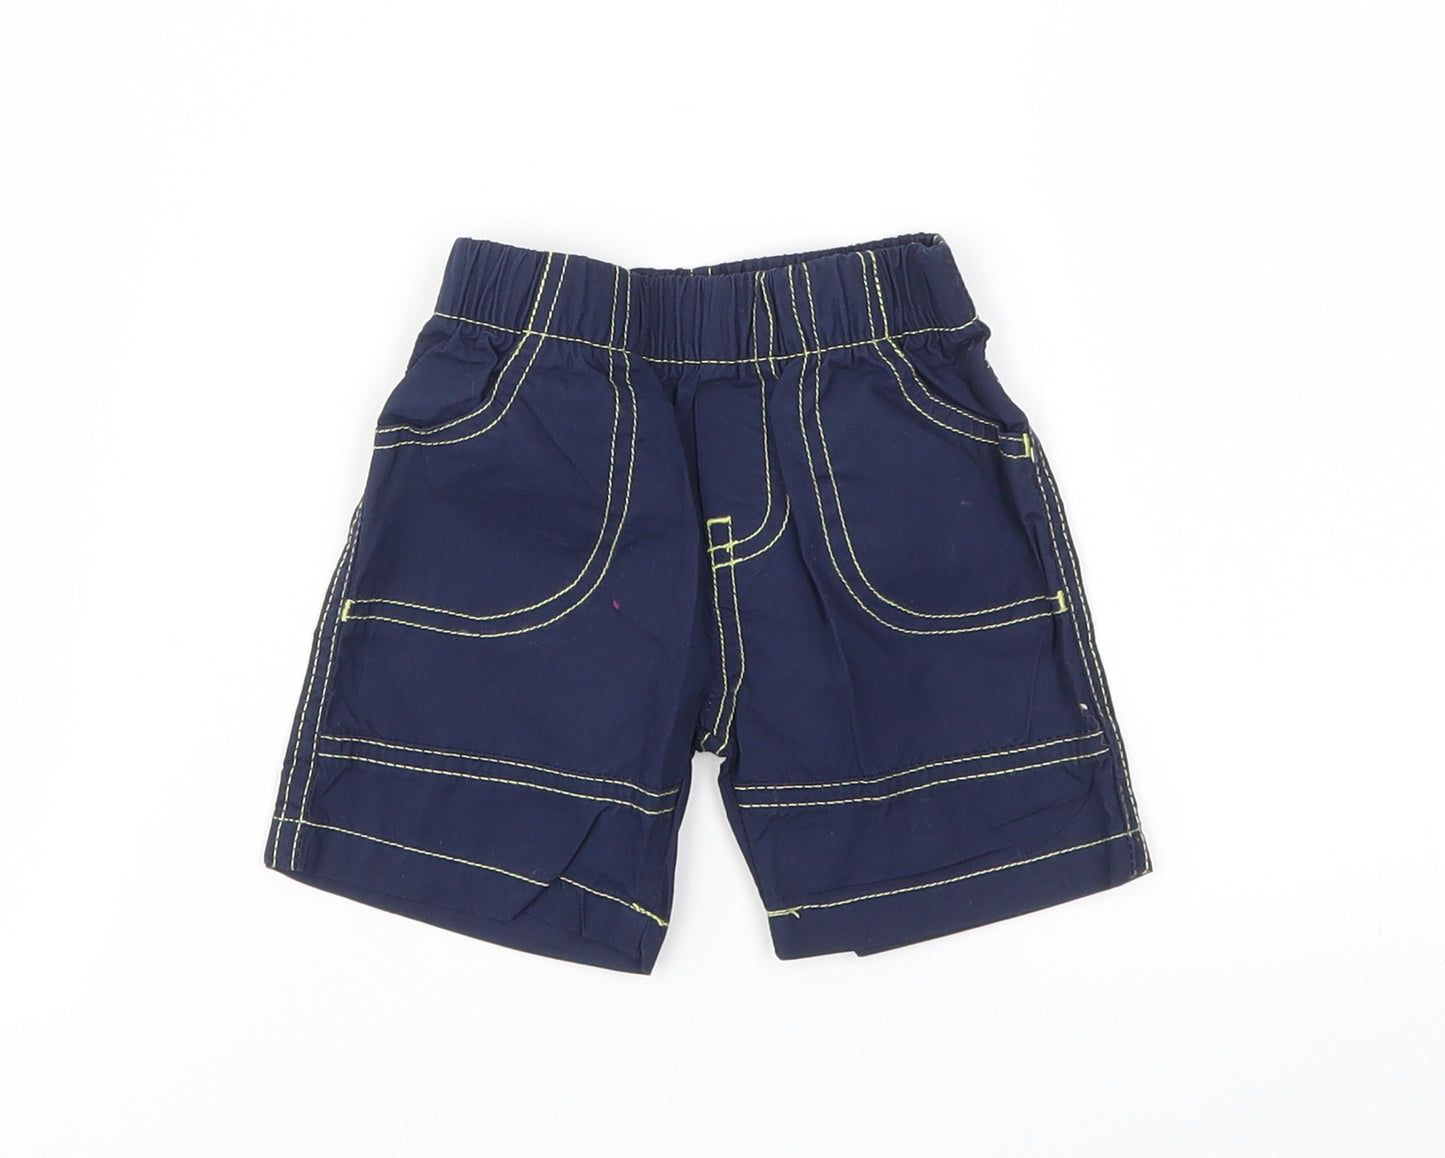 Pitter Patter Boys Blue   Cargo Trousers Size 0-3 Months